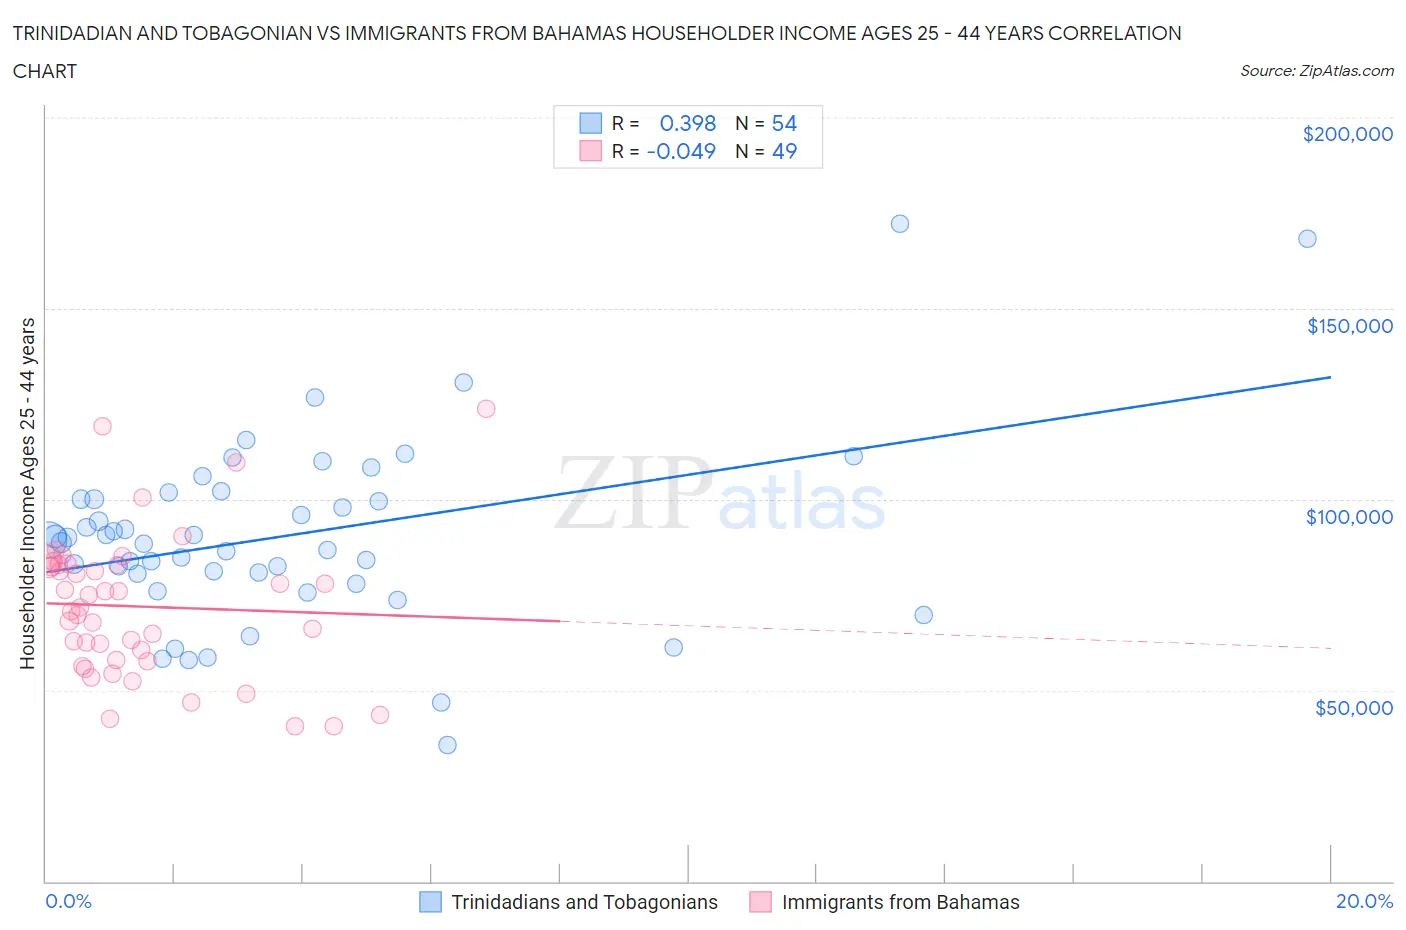 Trinidadian and Tobagonian vs Immigrants from Bahamas Householder Income Ages 25 - 44 years